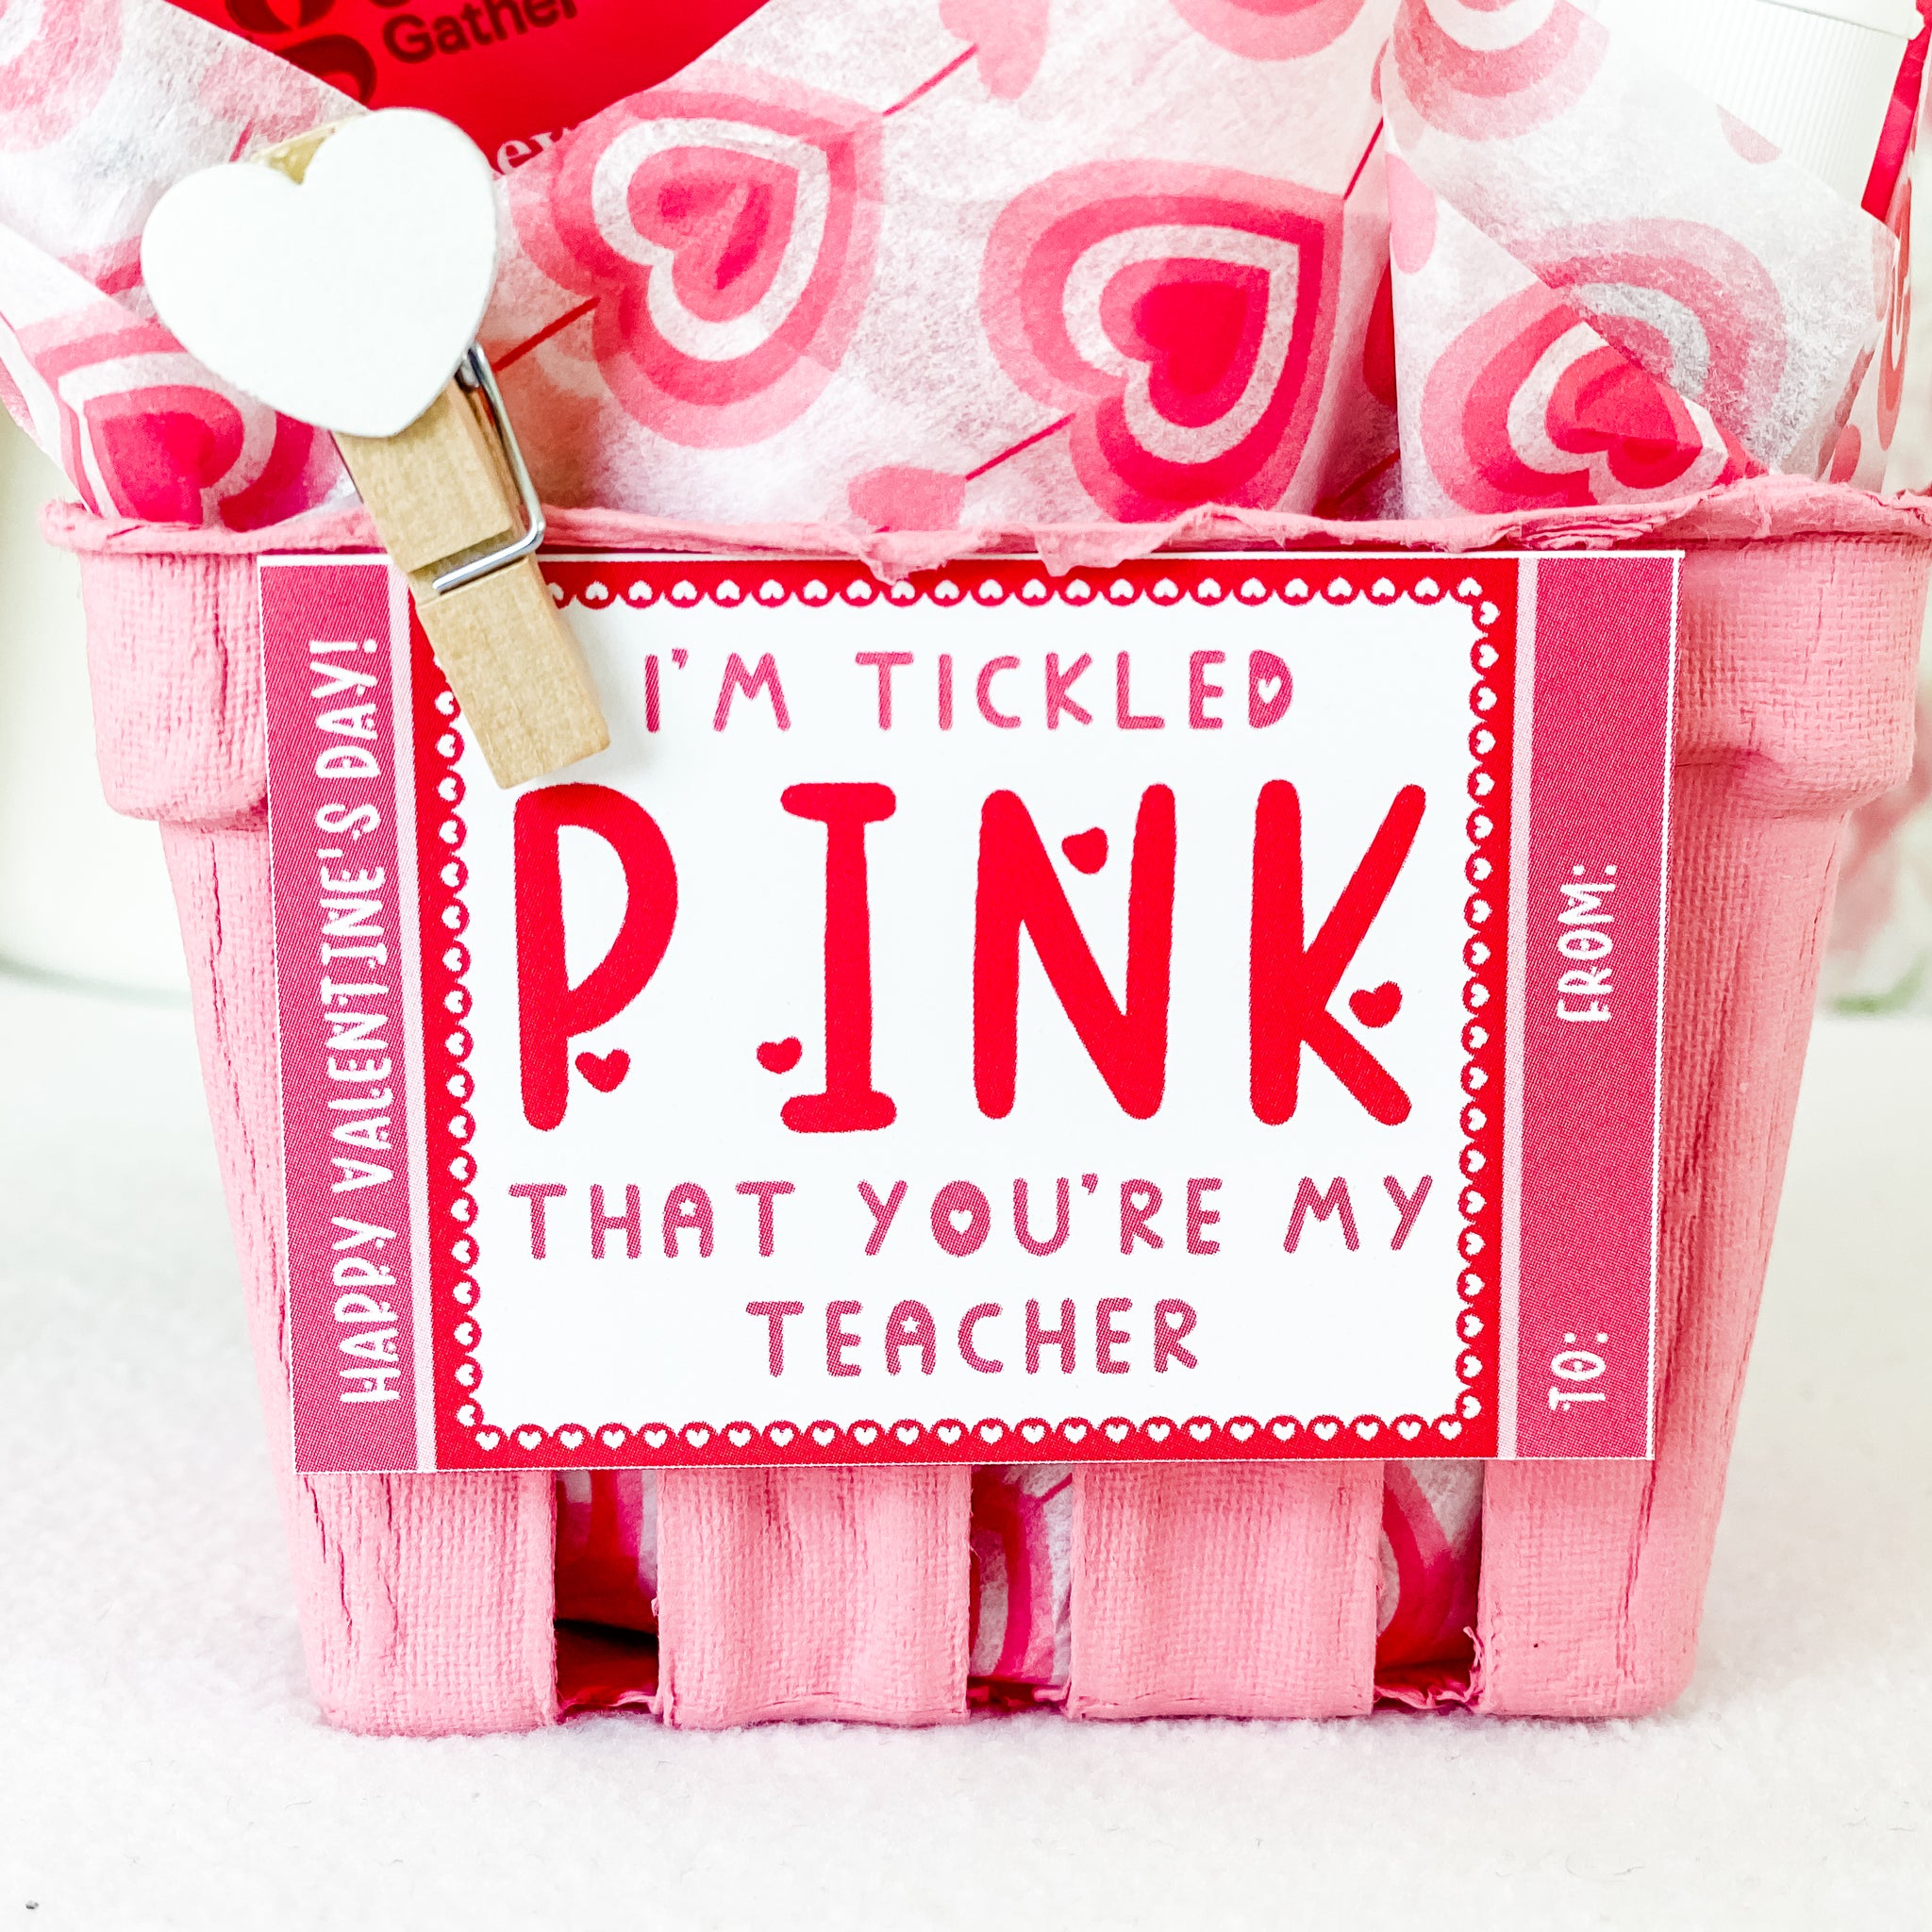 Valentine's Day Student Gift Ideas & Gift Tags - Lessons for